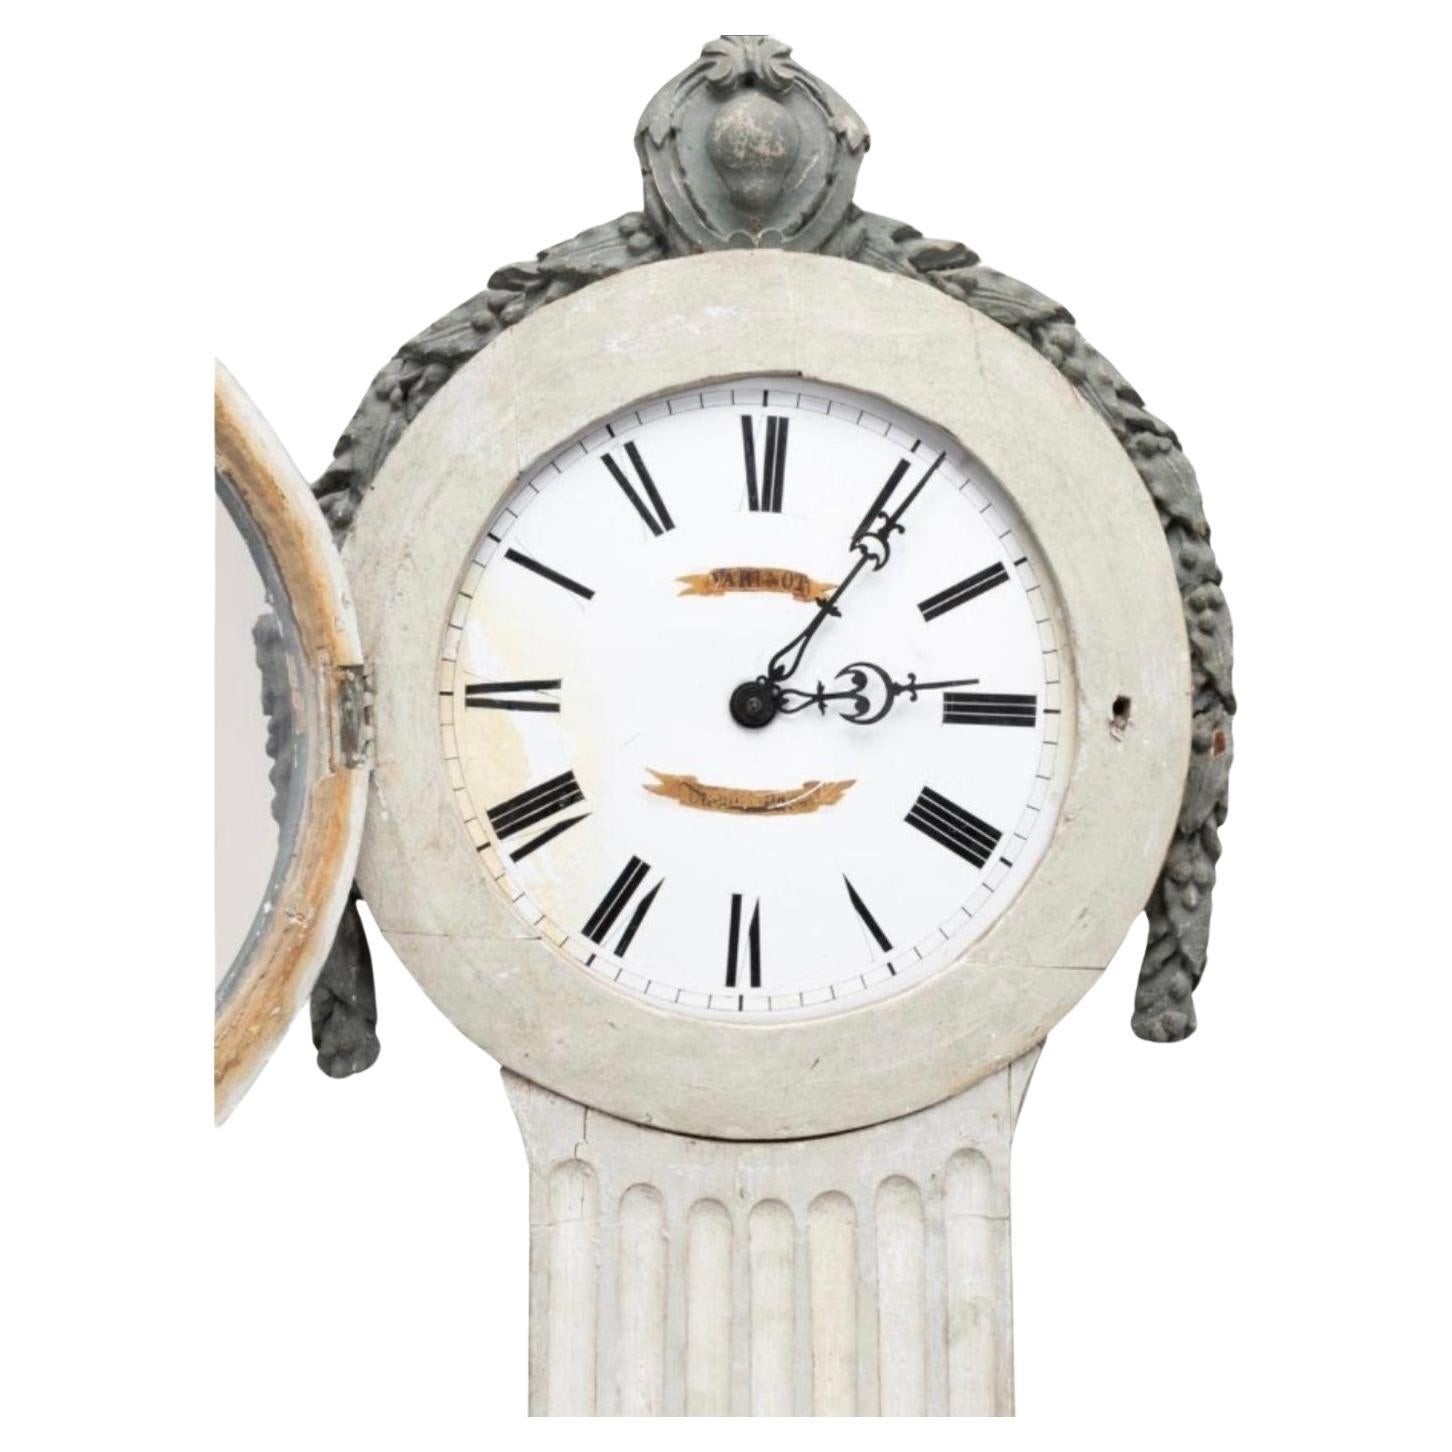 Incredibly rare Swedish Gustavian Neoclassical grey painted pine tall case clock, late 18th or early 19th century, having a circular hood surmounted by a cartouche, the face with Roman numerals and illegible maker's name, rising on a fluted trunk